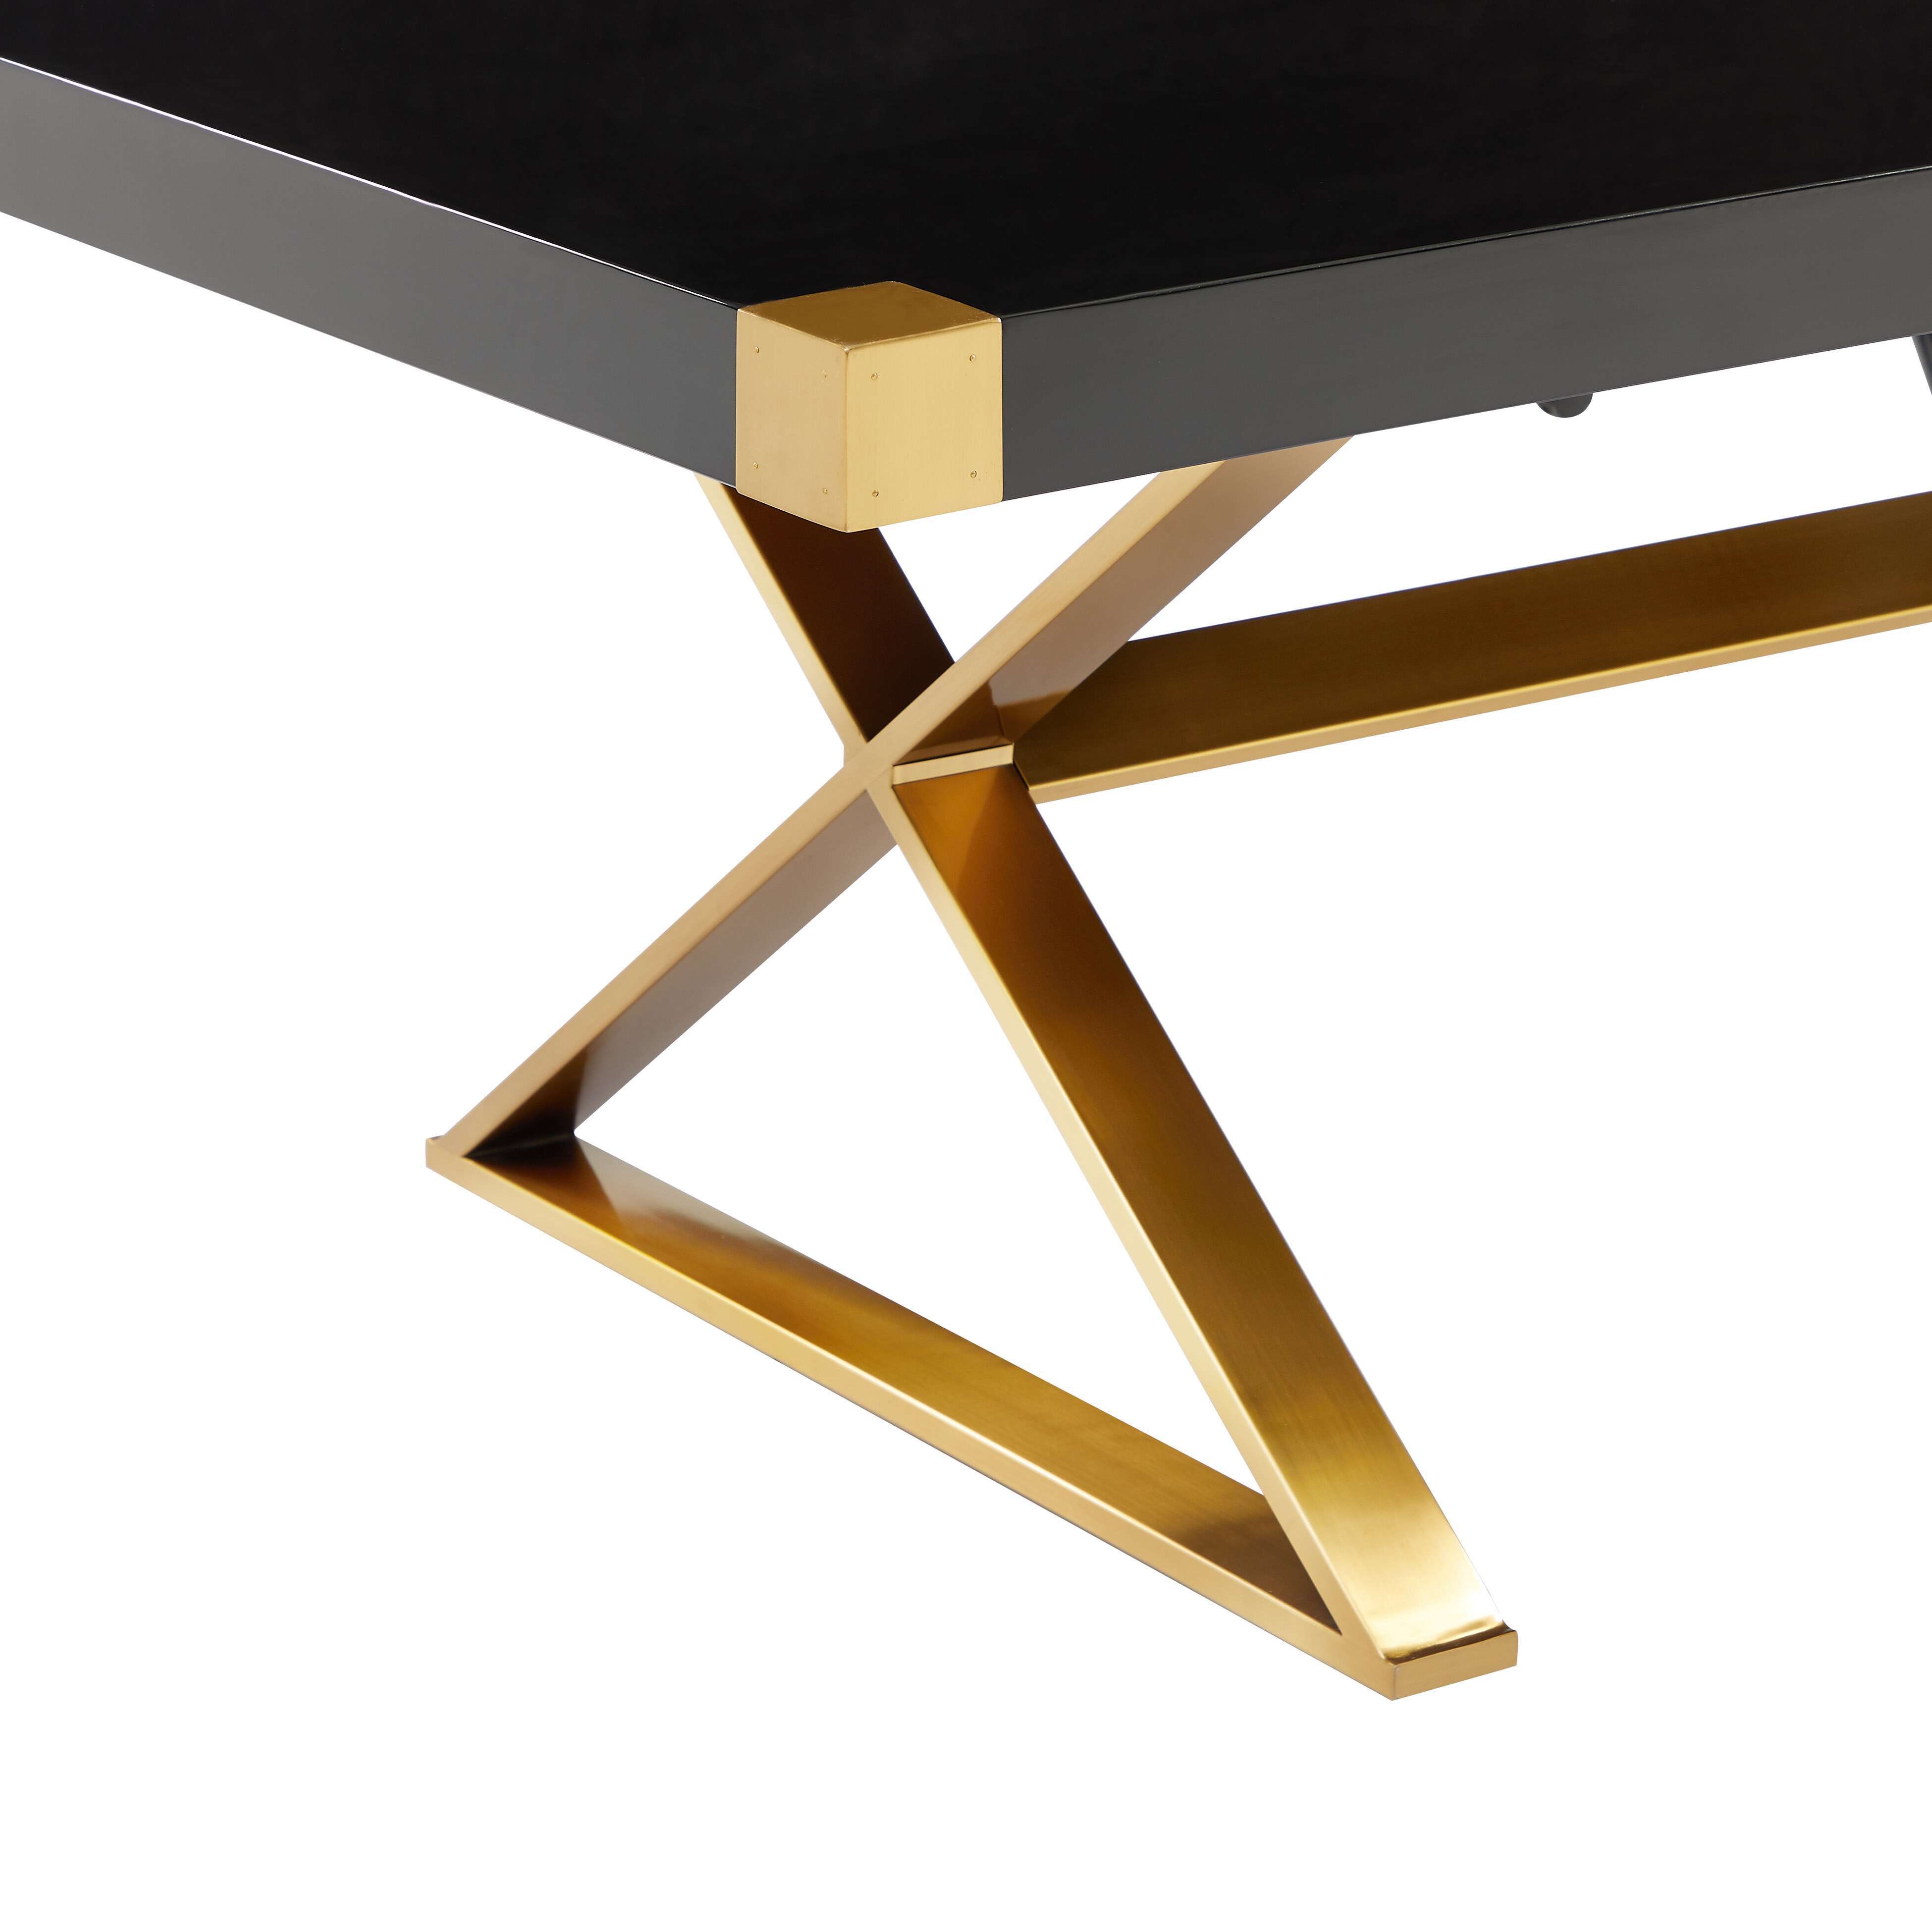 Adeline Black Lacquer Dining Table - Image 2